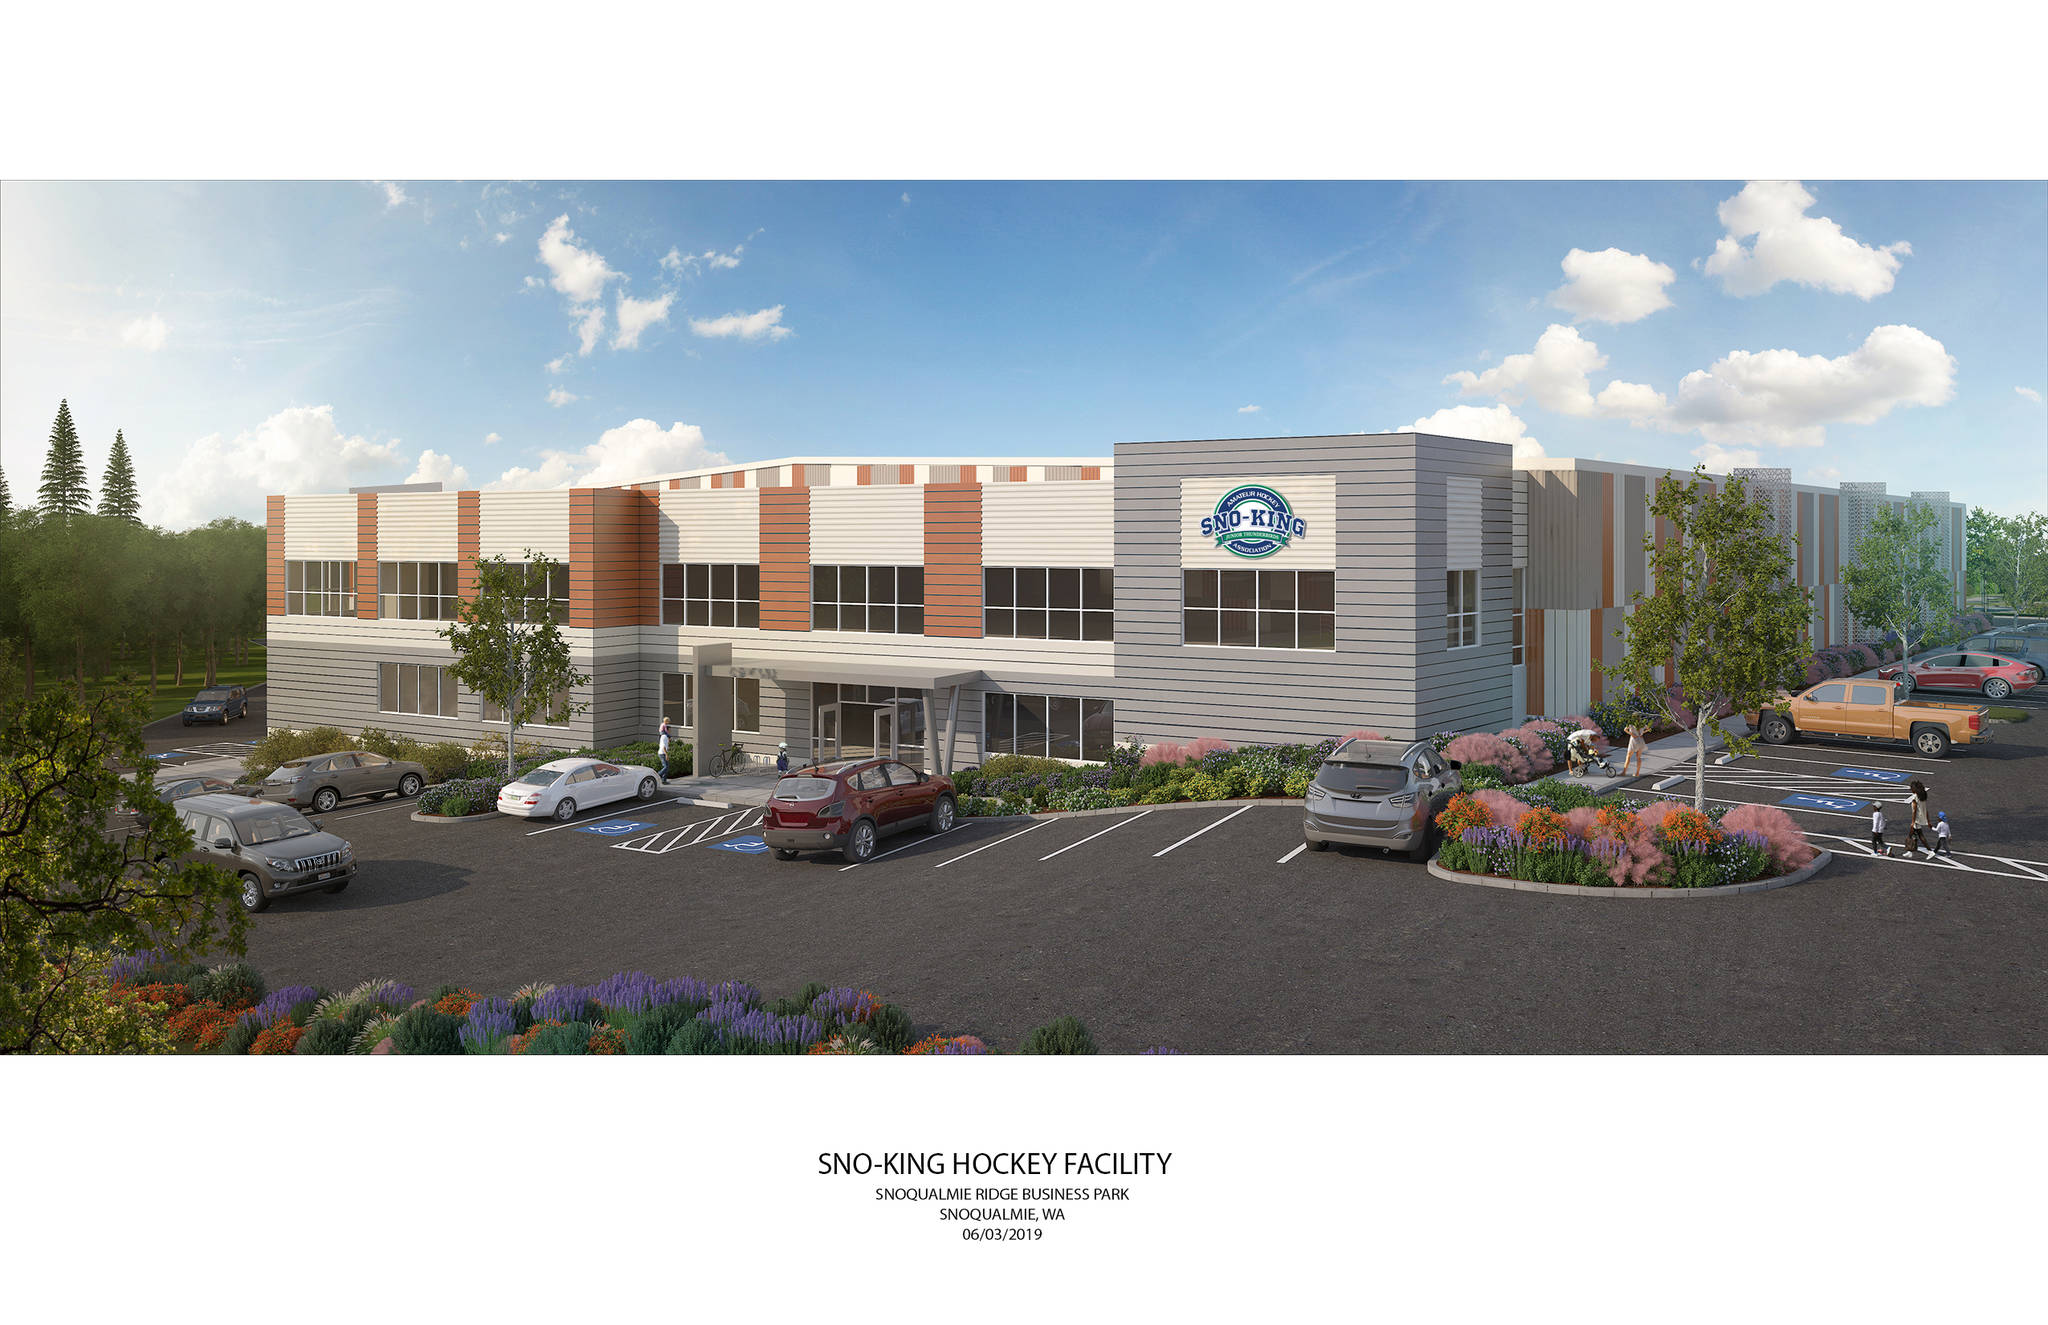 Sno-King exterior rendering for its future Snoqualmie arena. Courtesy graphic